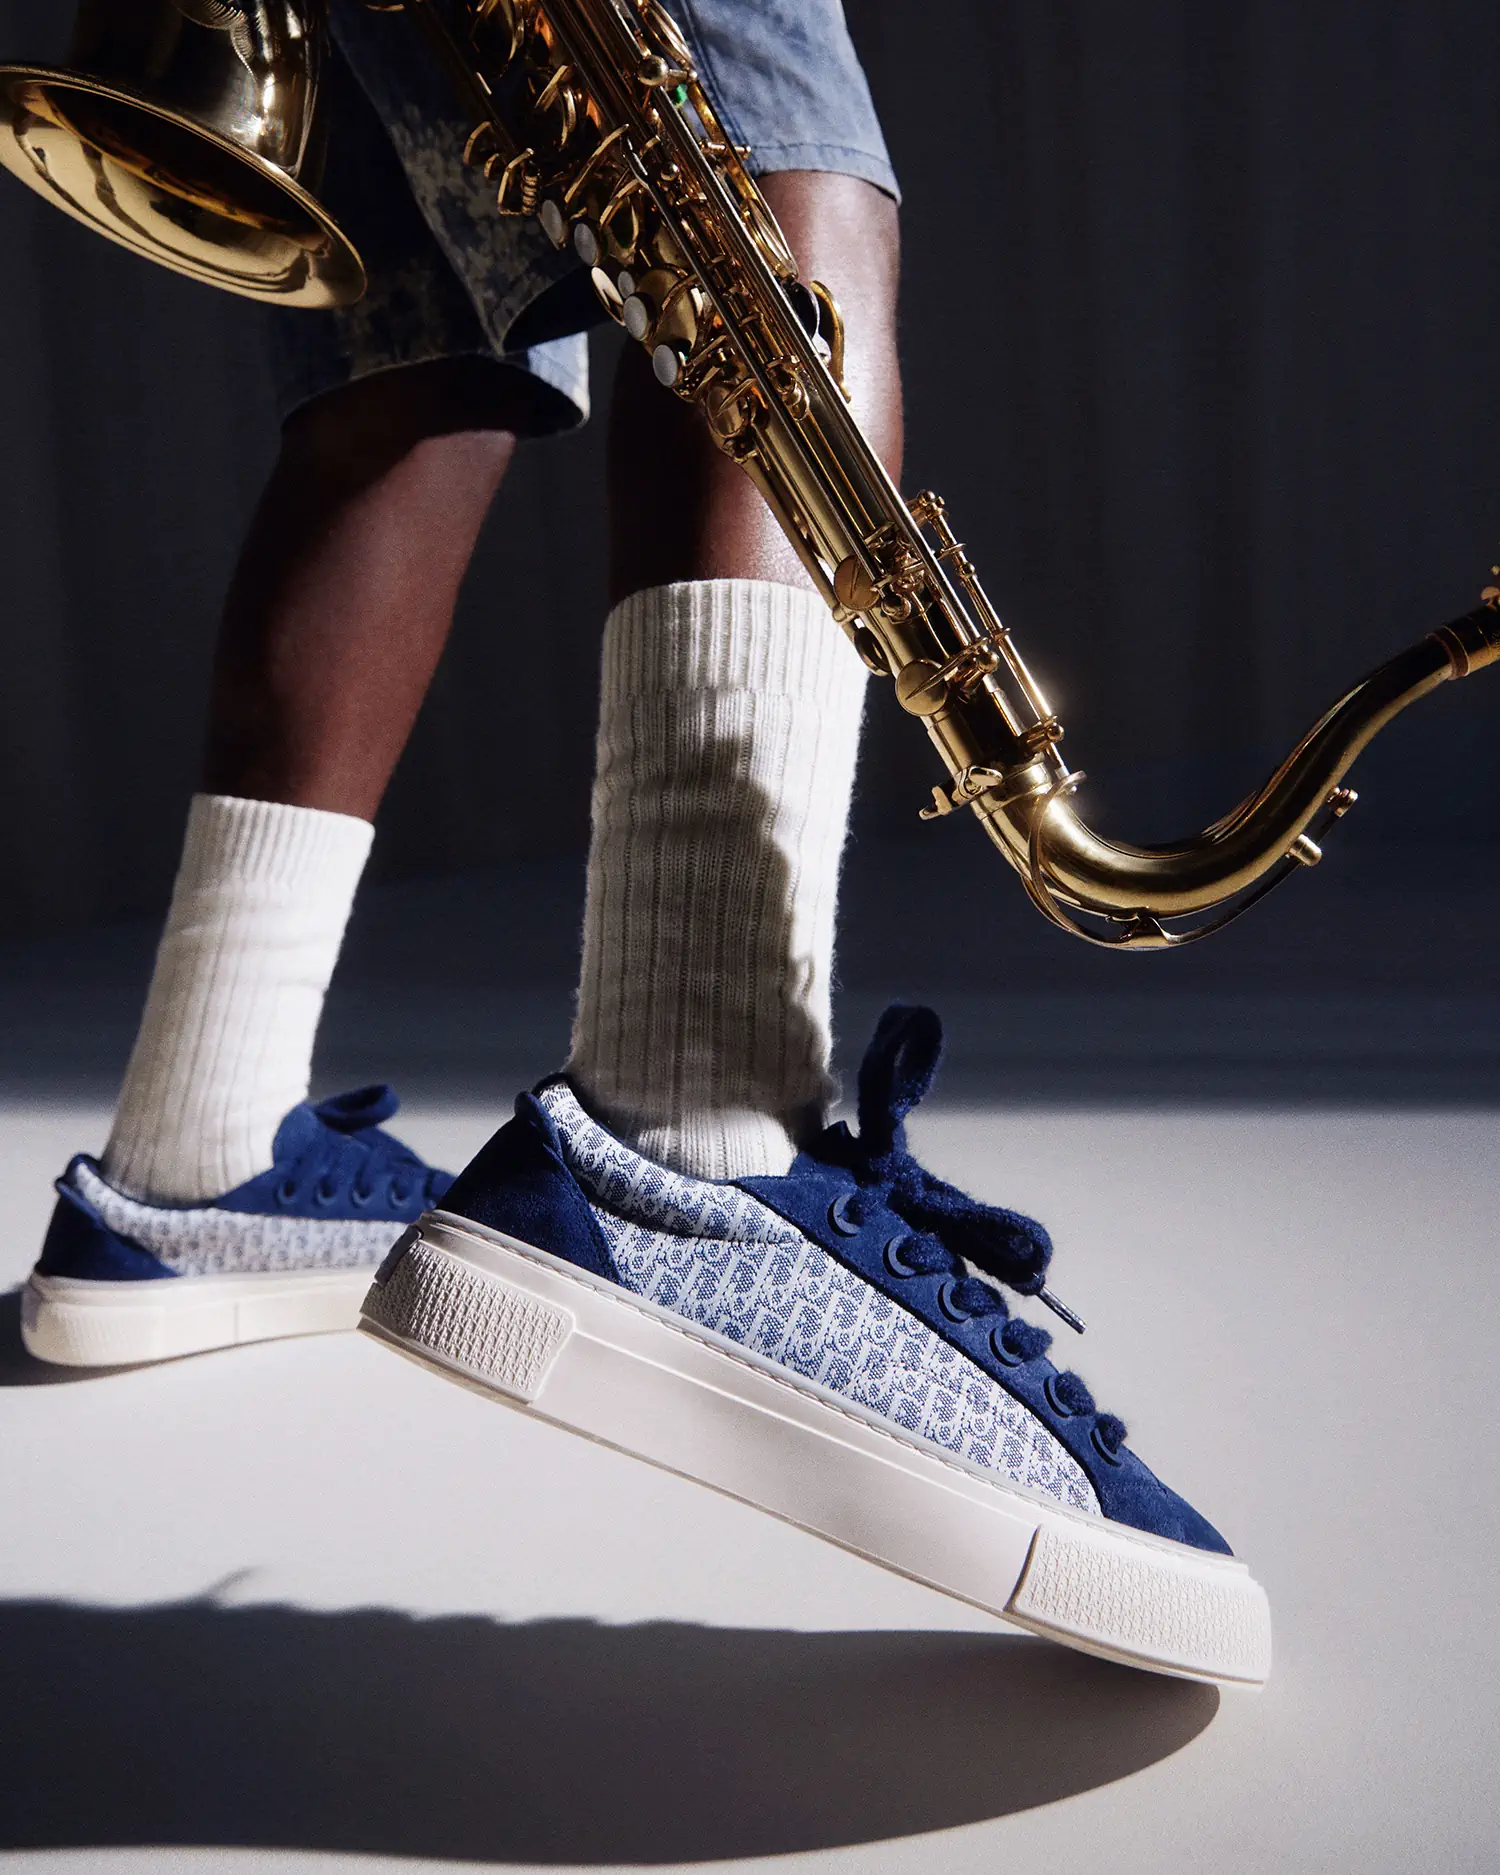 Dior B33, the first Dior sneakers to feature an encrypted key with exclusive new services